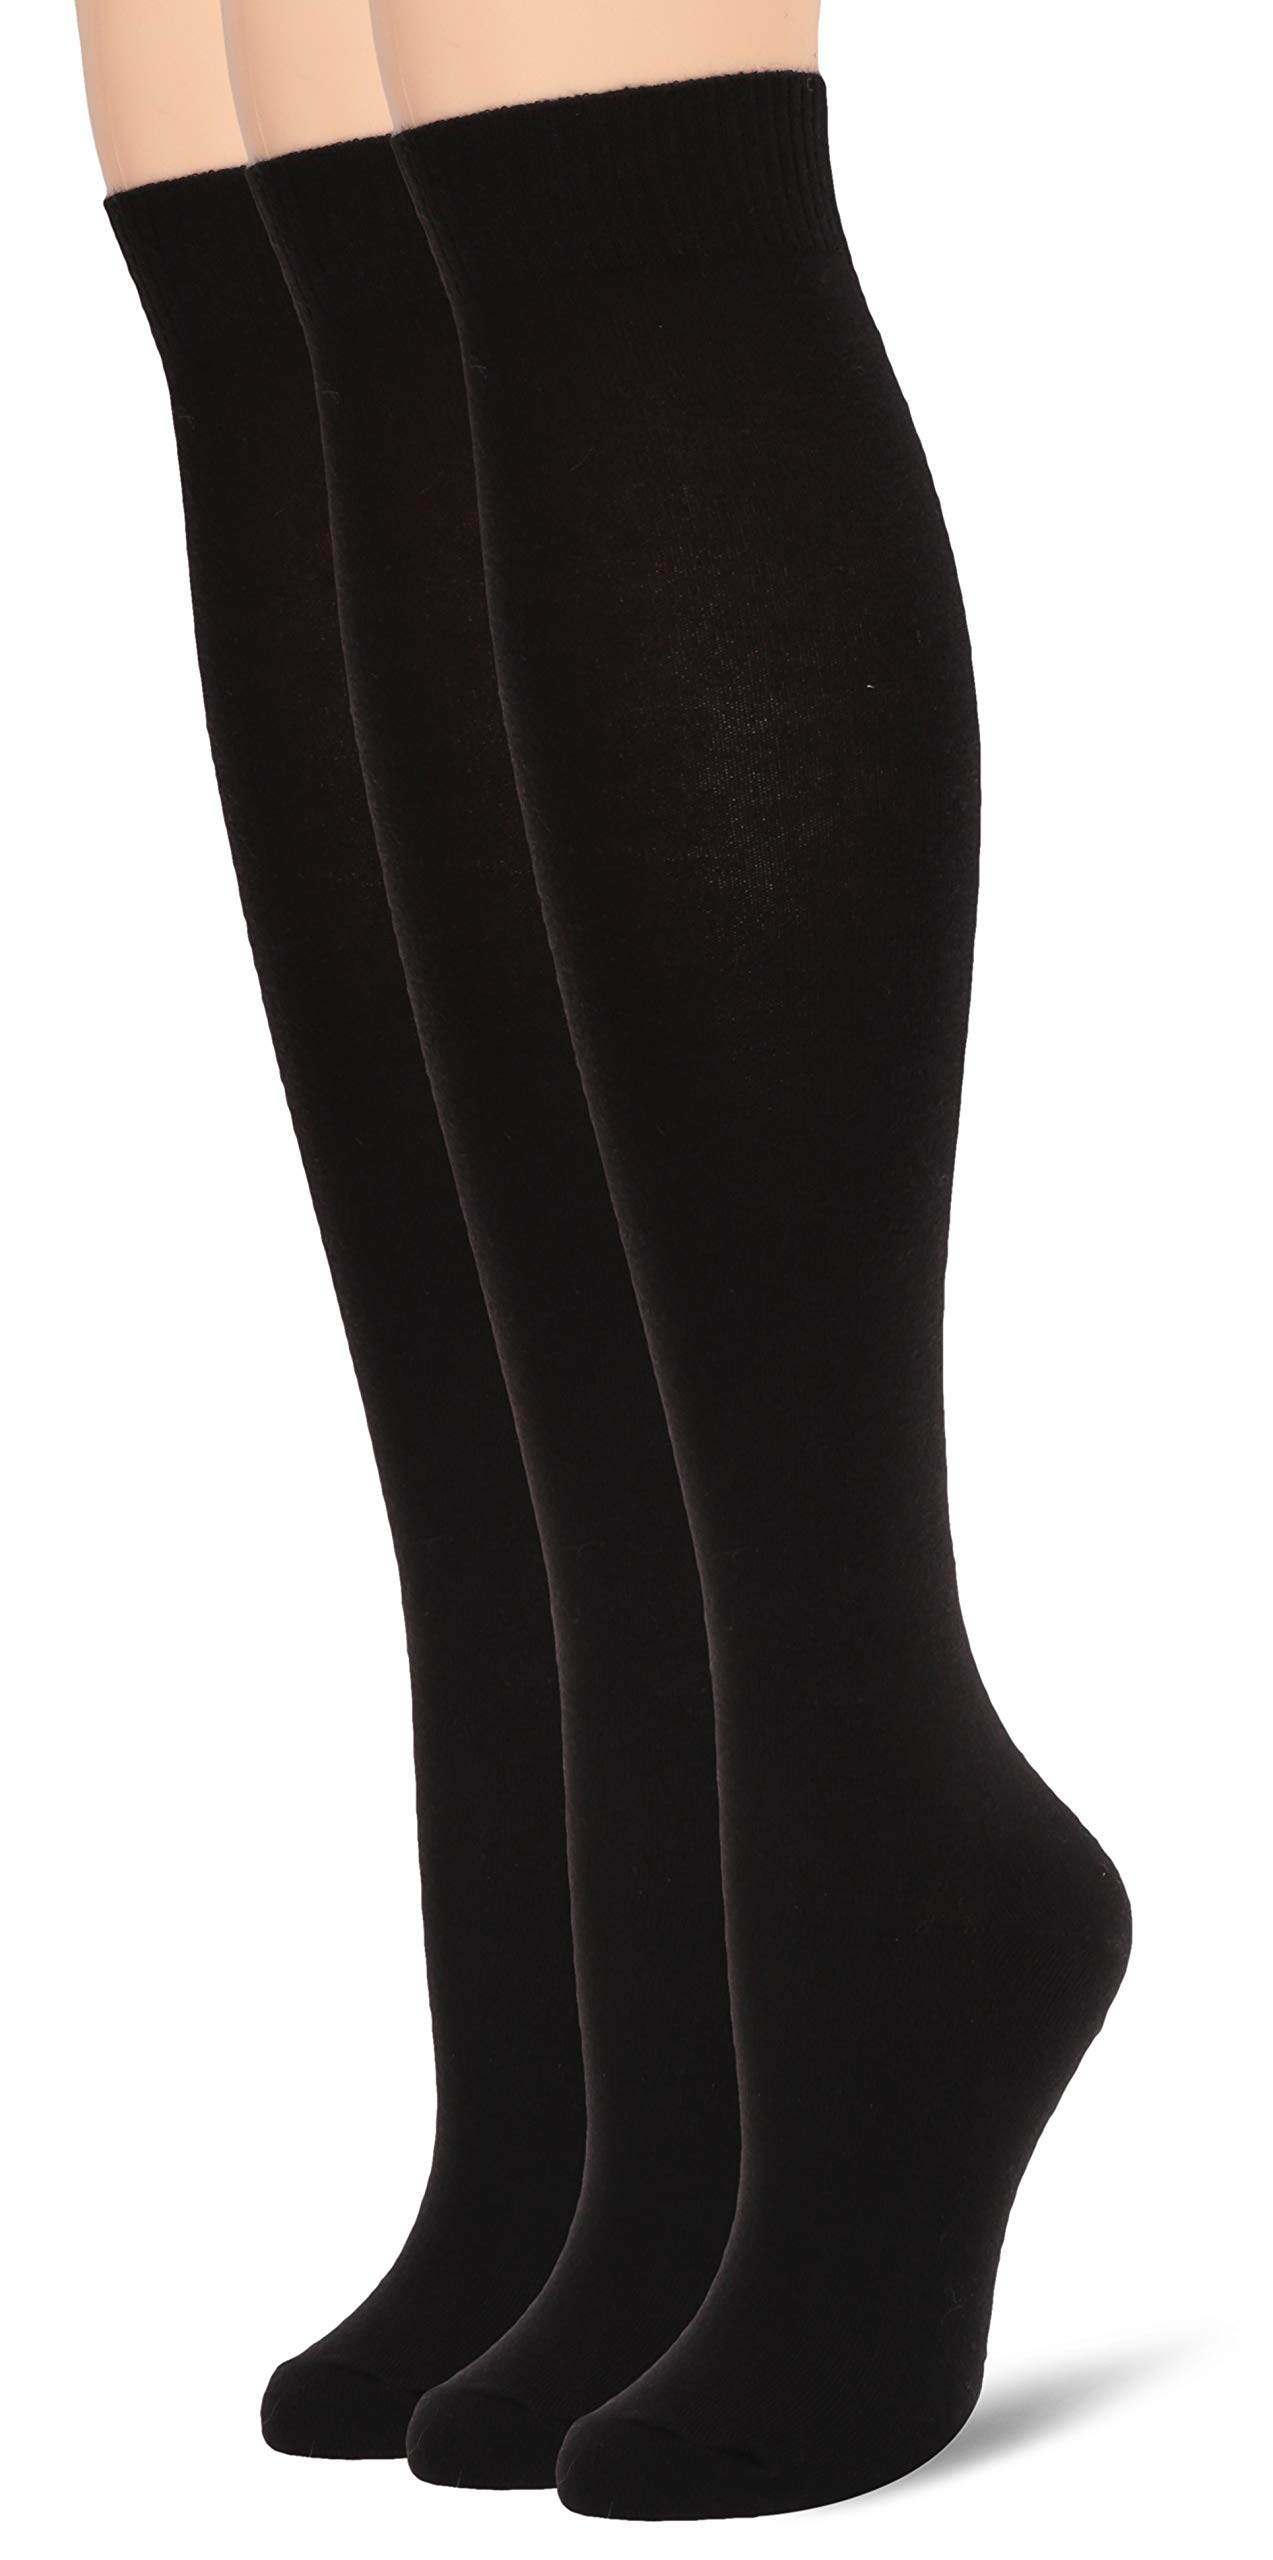 HUE Women's Flat Knit Knee Socks-Soft Breathable Cotton Blend-Stay-Up Fit